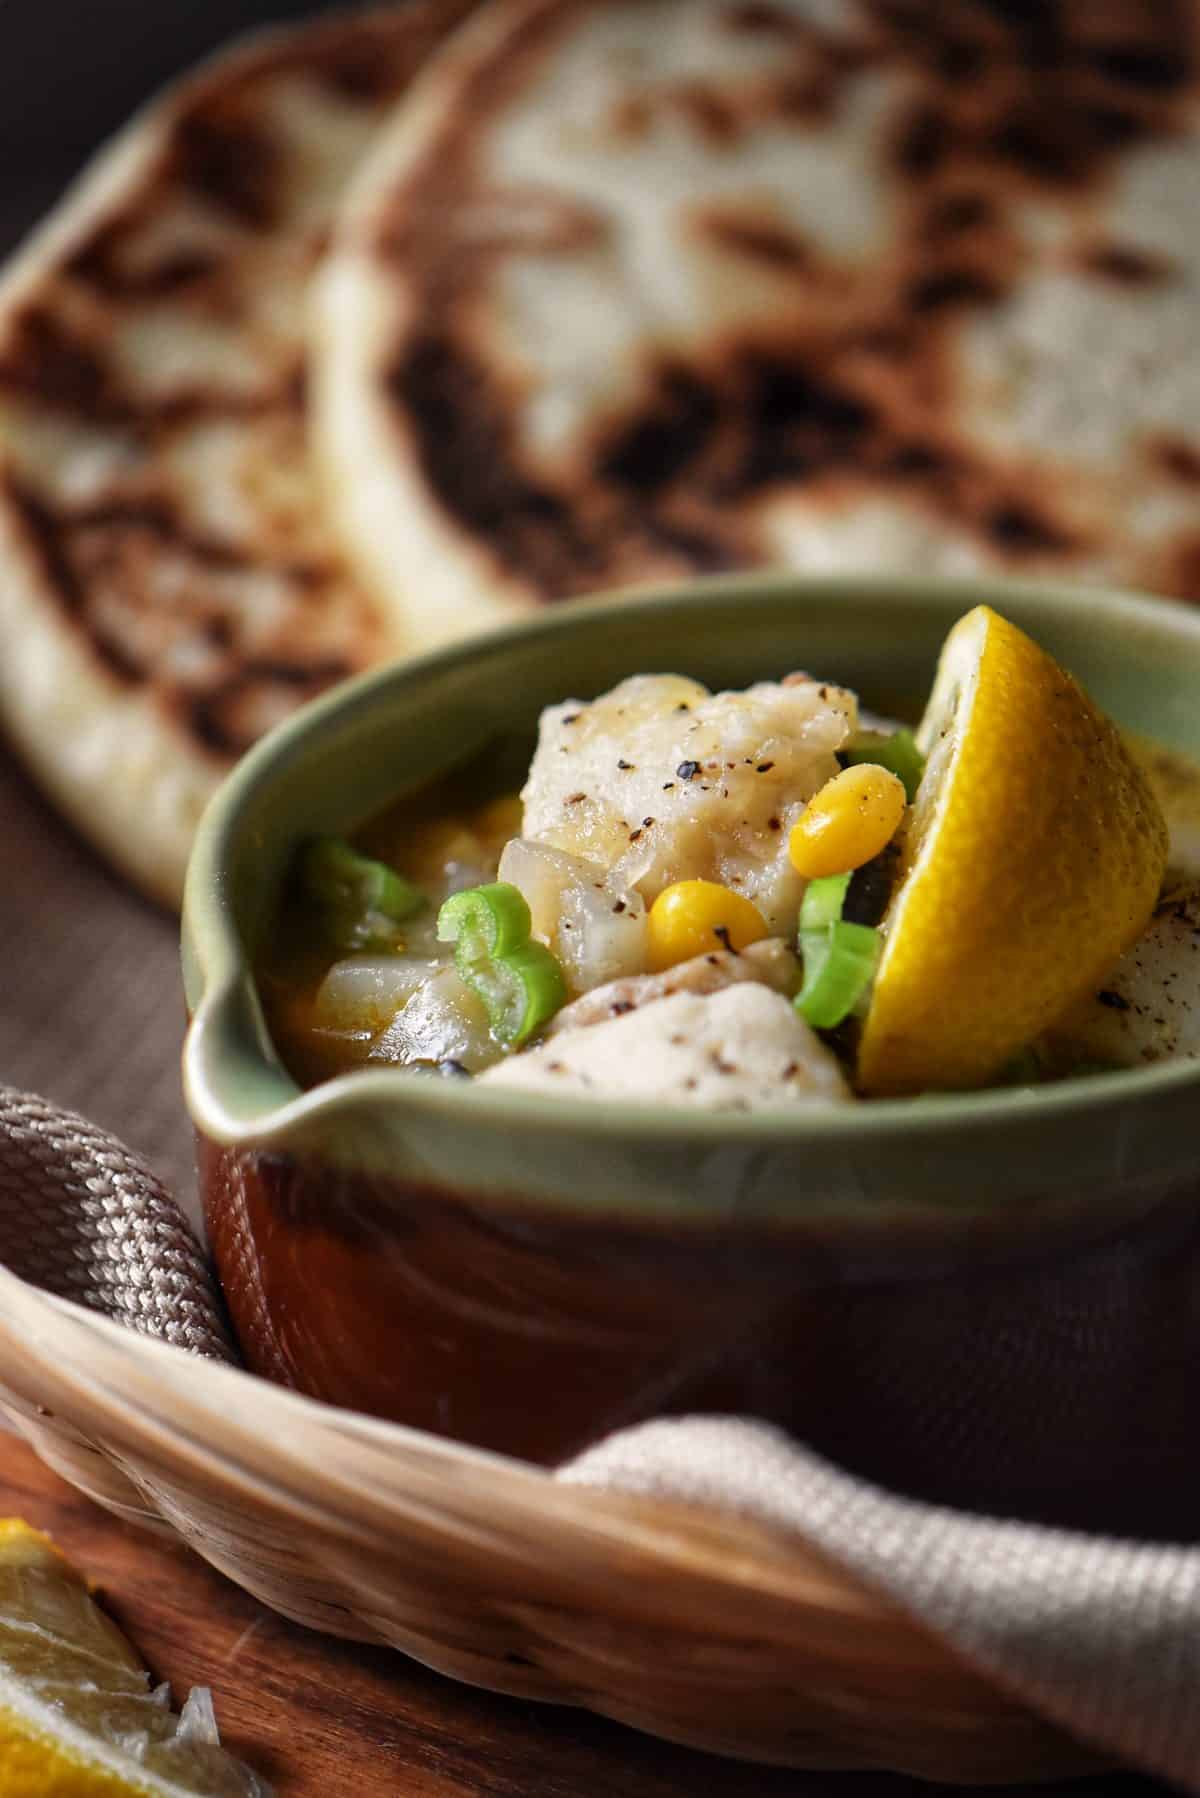 A bowl of cod chowder next to naan.